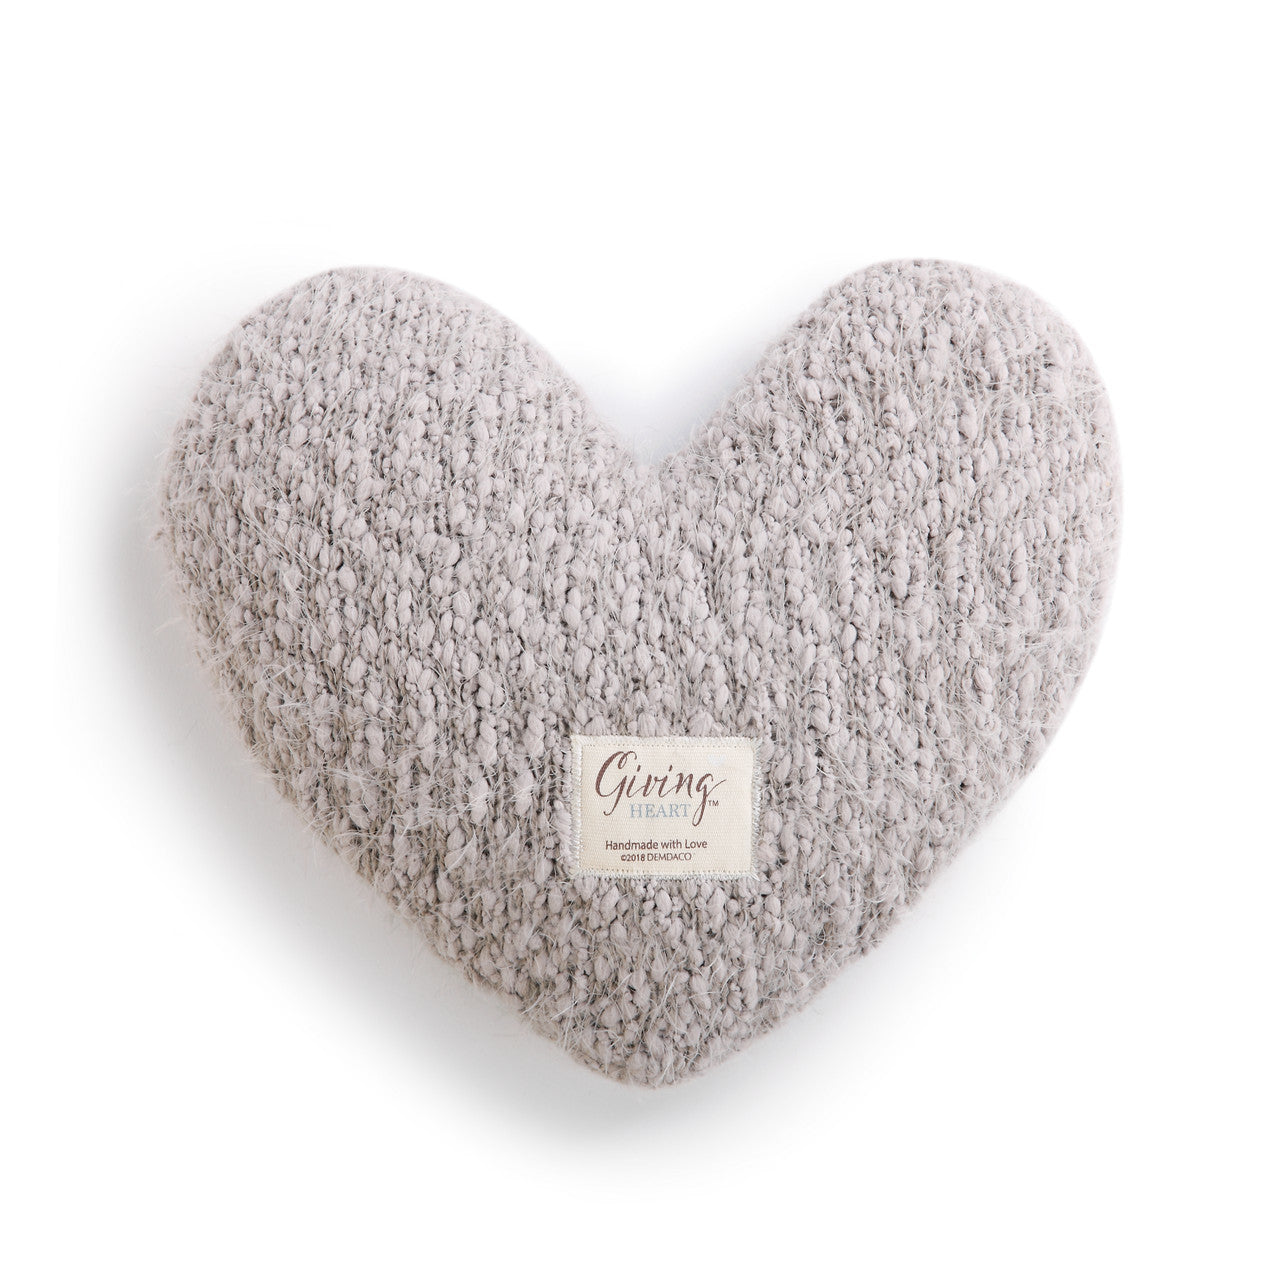 Giving Heart Pillow, Taupe